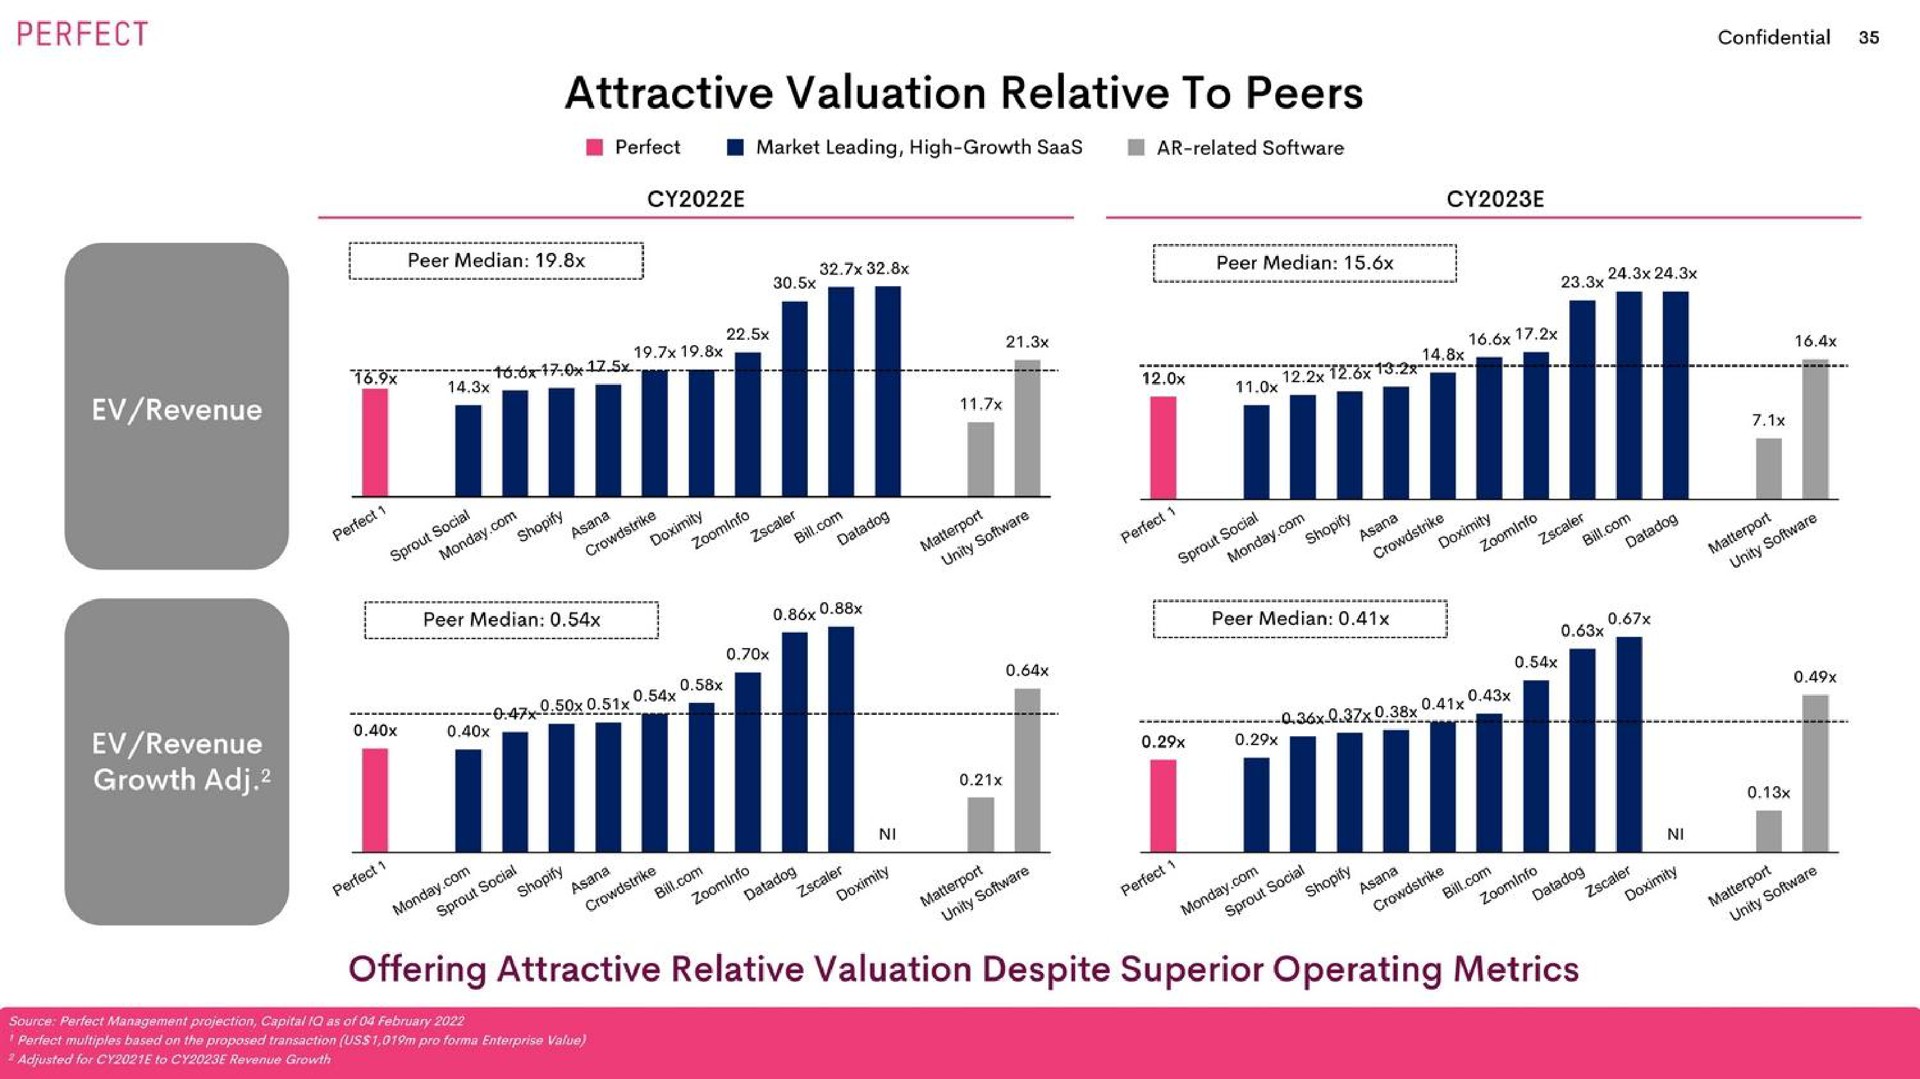 perfect attractive valuation relative to peers woe go got a go gol offering attractive relative valuation despite superior operating metrics | Perfect